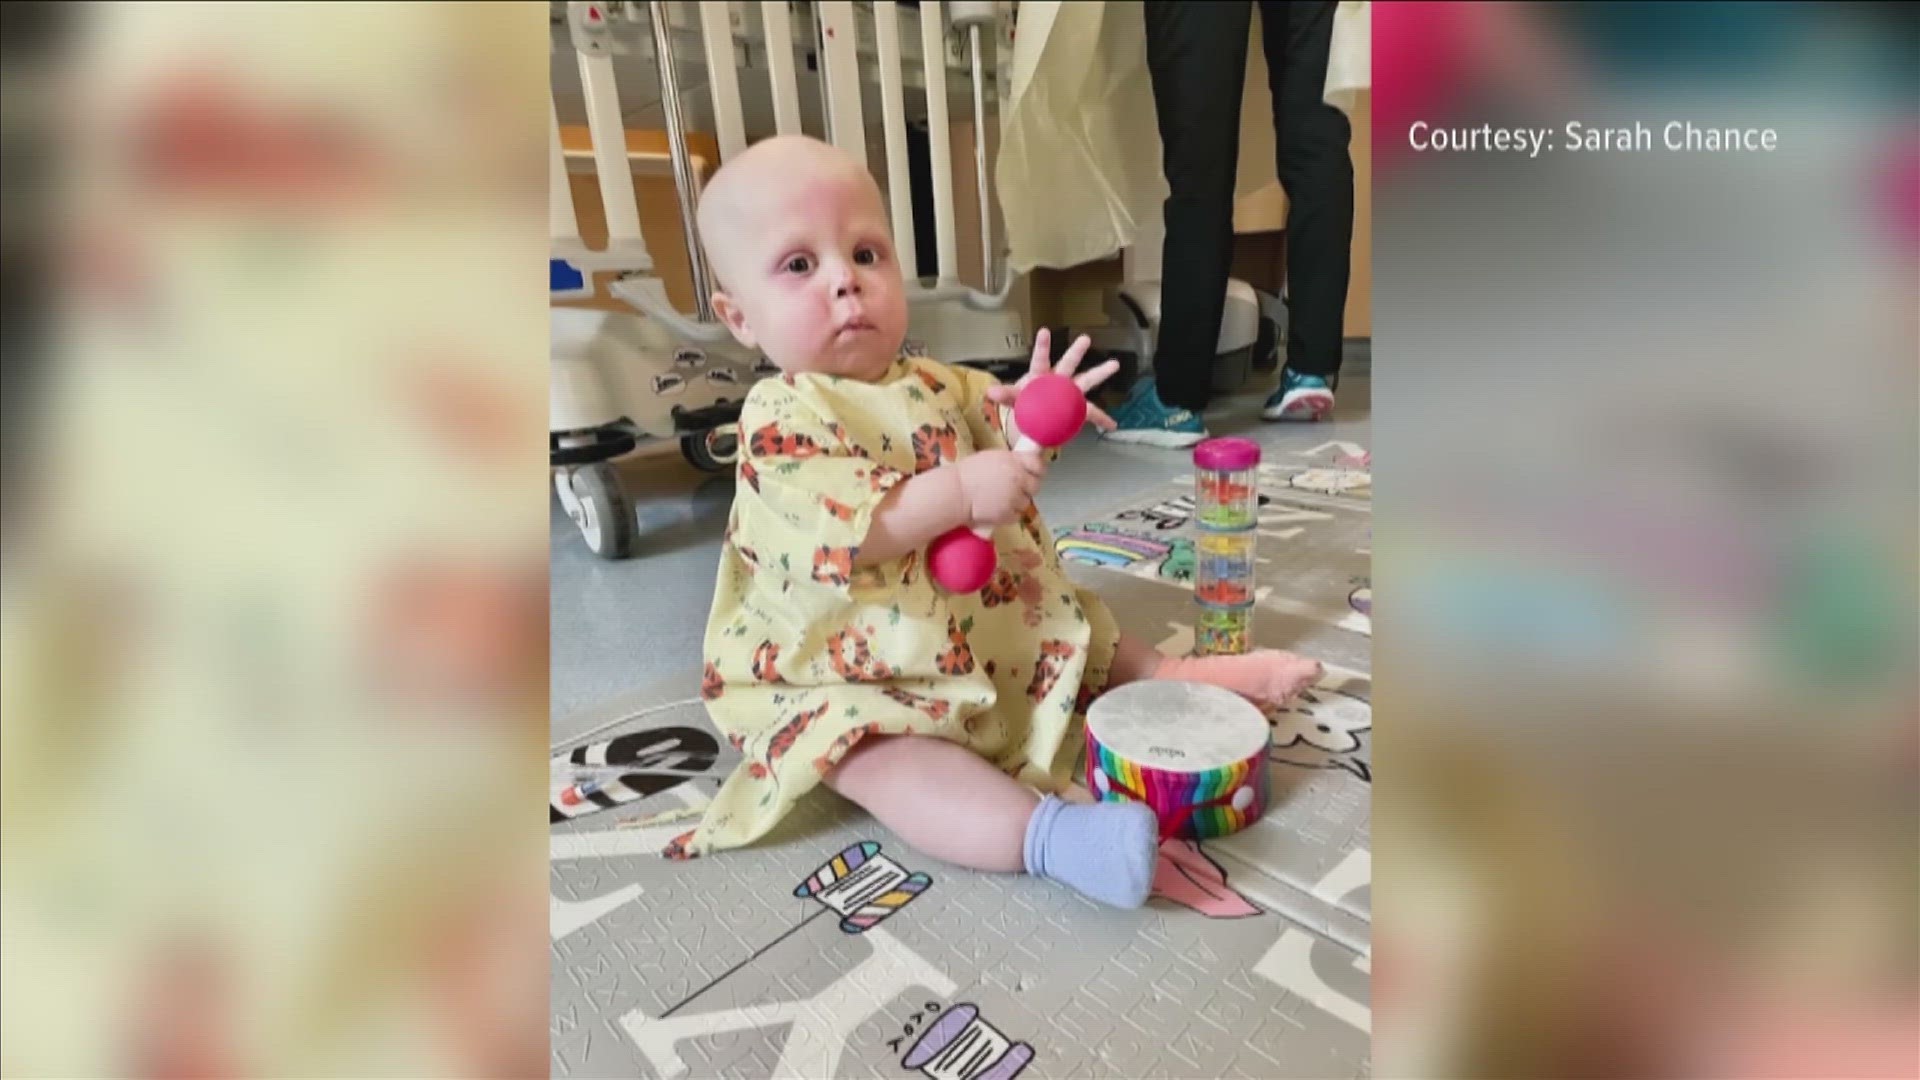 Sarah Chance's daughter Charlie was just six months old when she was diagnosed with a rare form of Leukemia. Sarah is now an advocate for summertime donations.